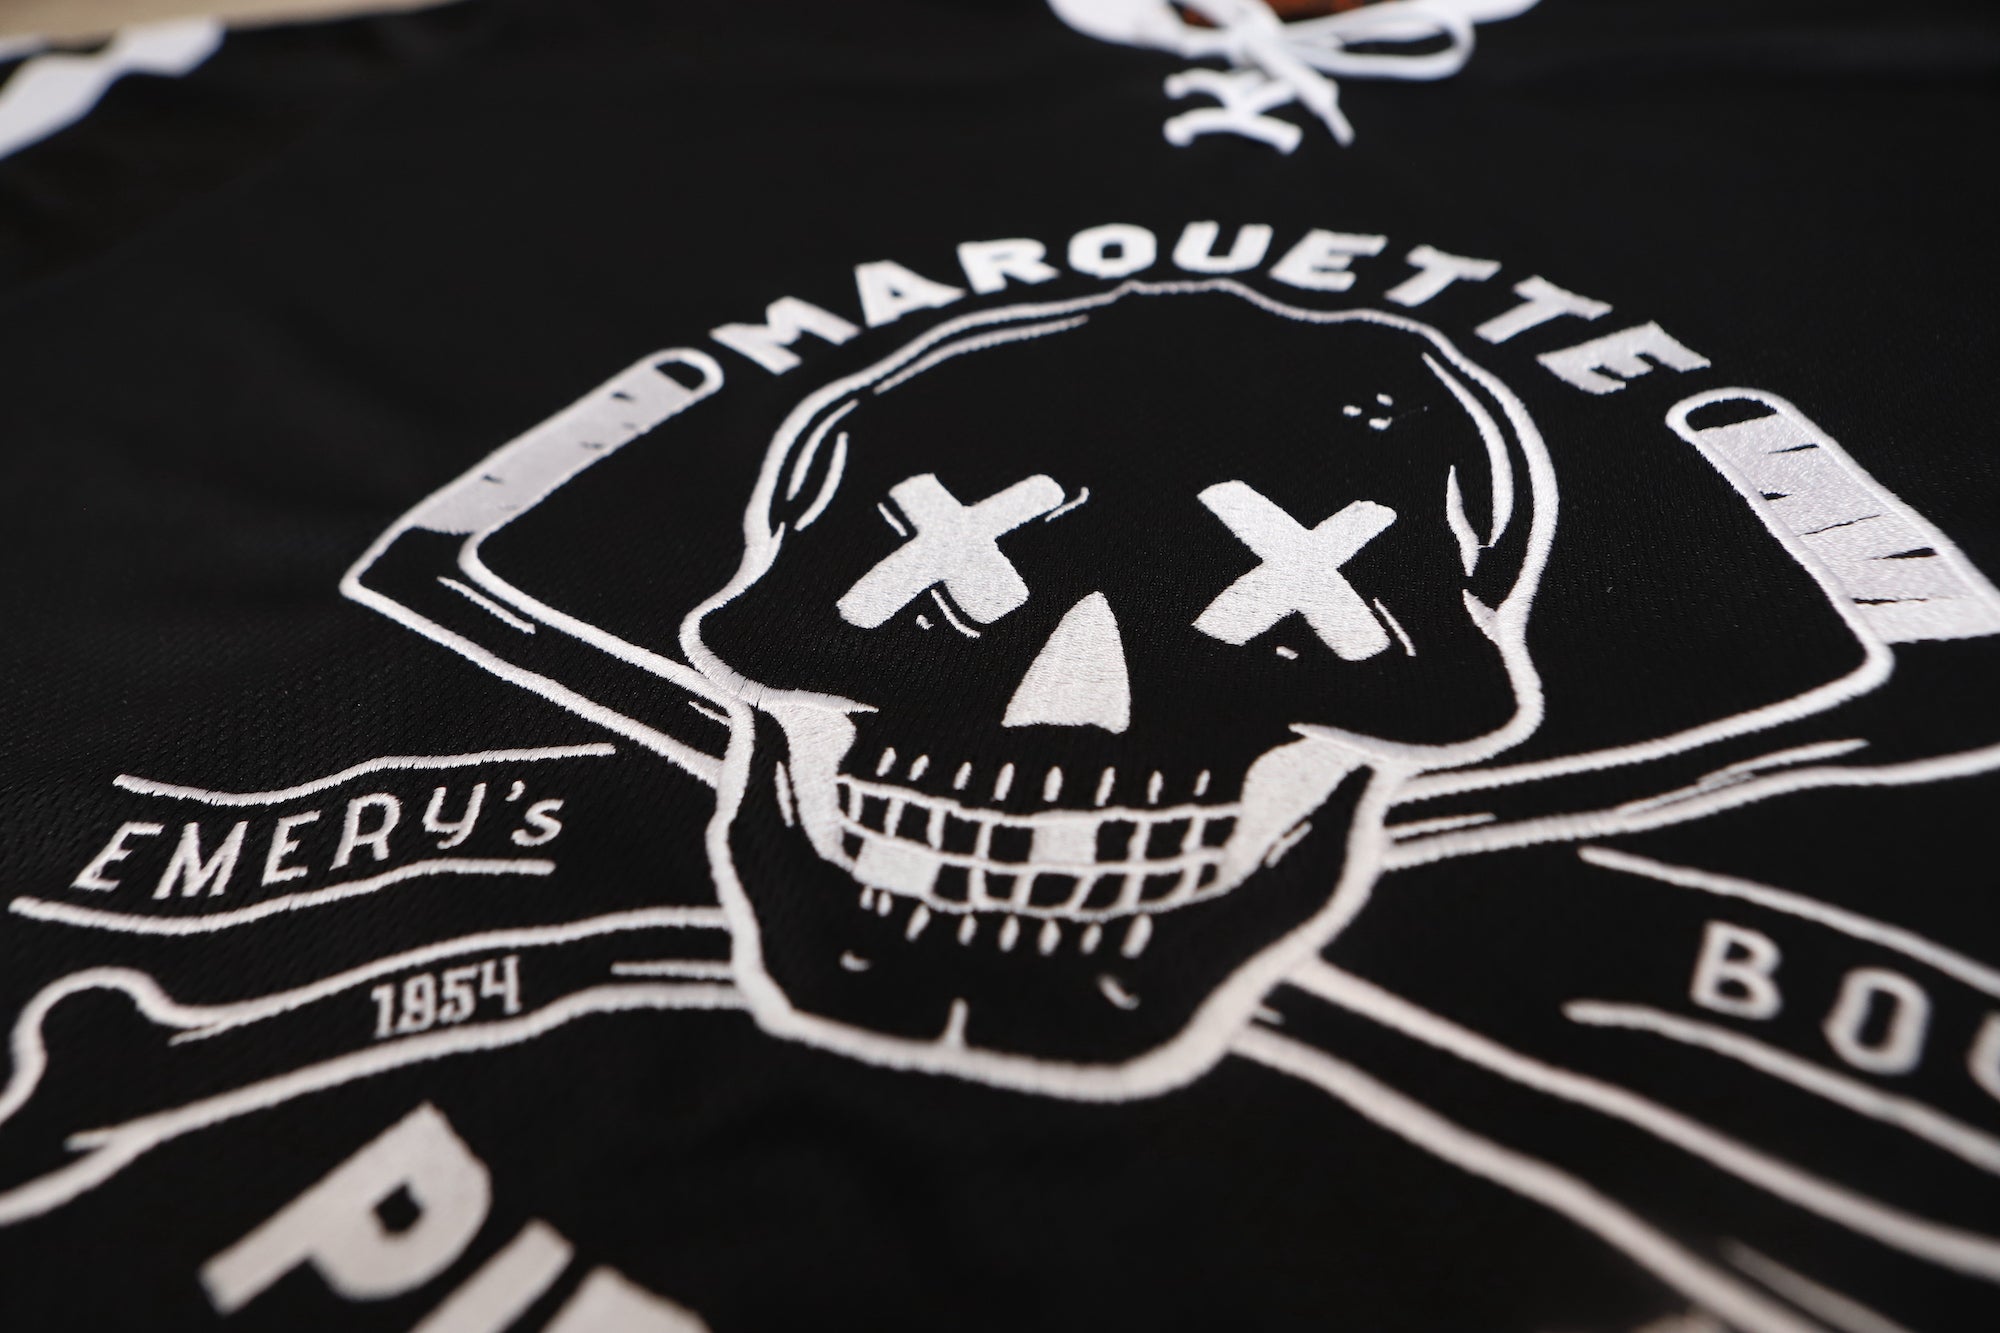 Marquette Pirates™ Jersey (BLANK)